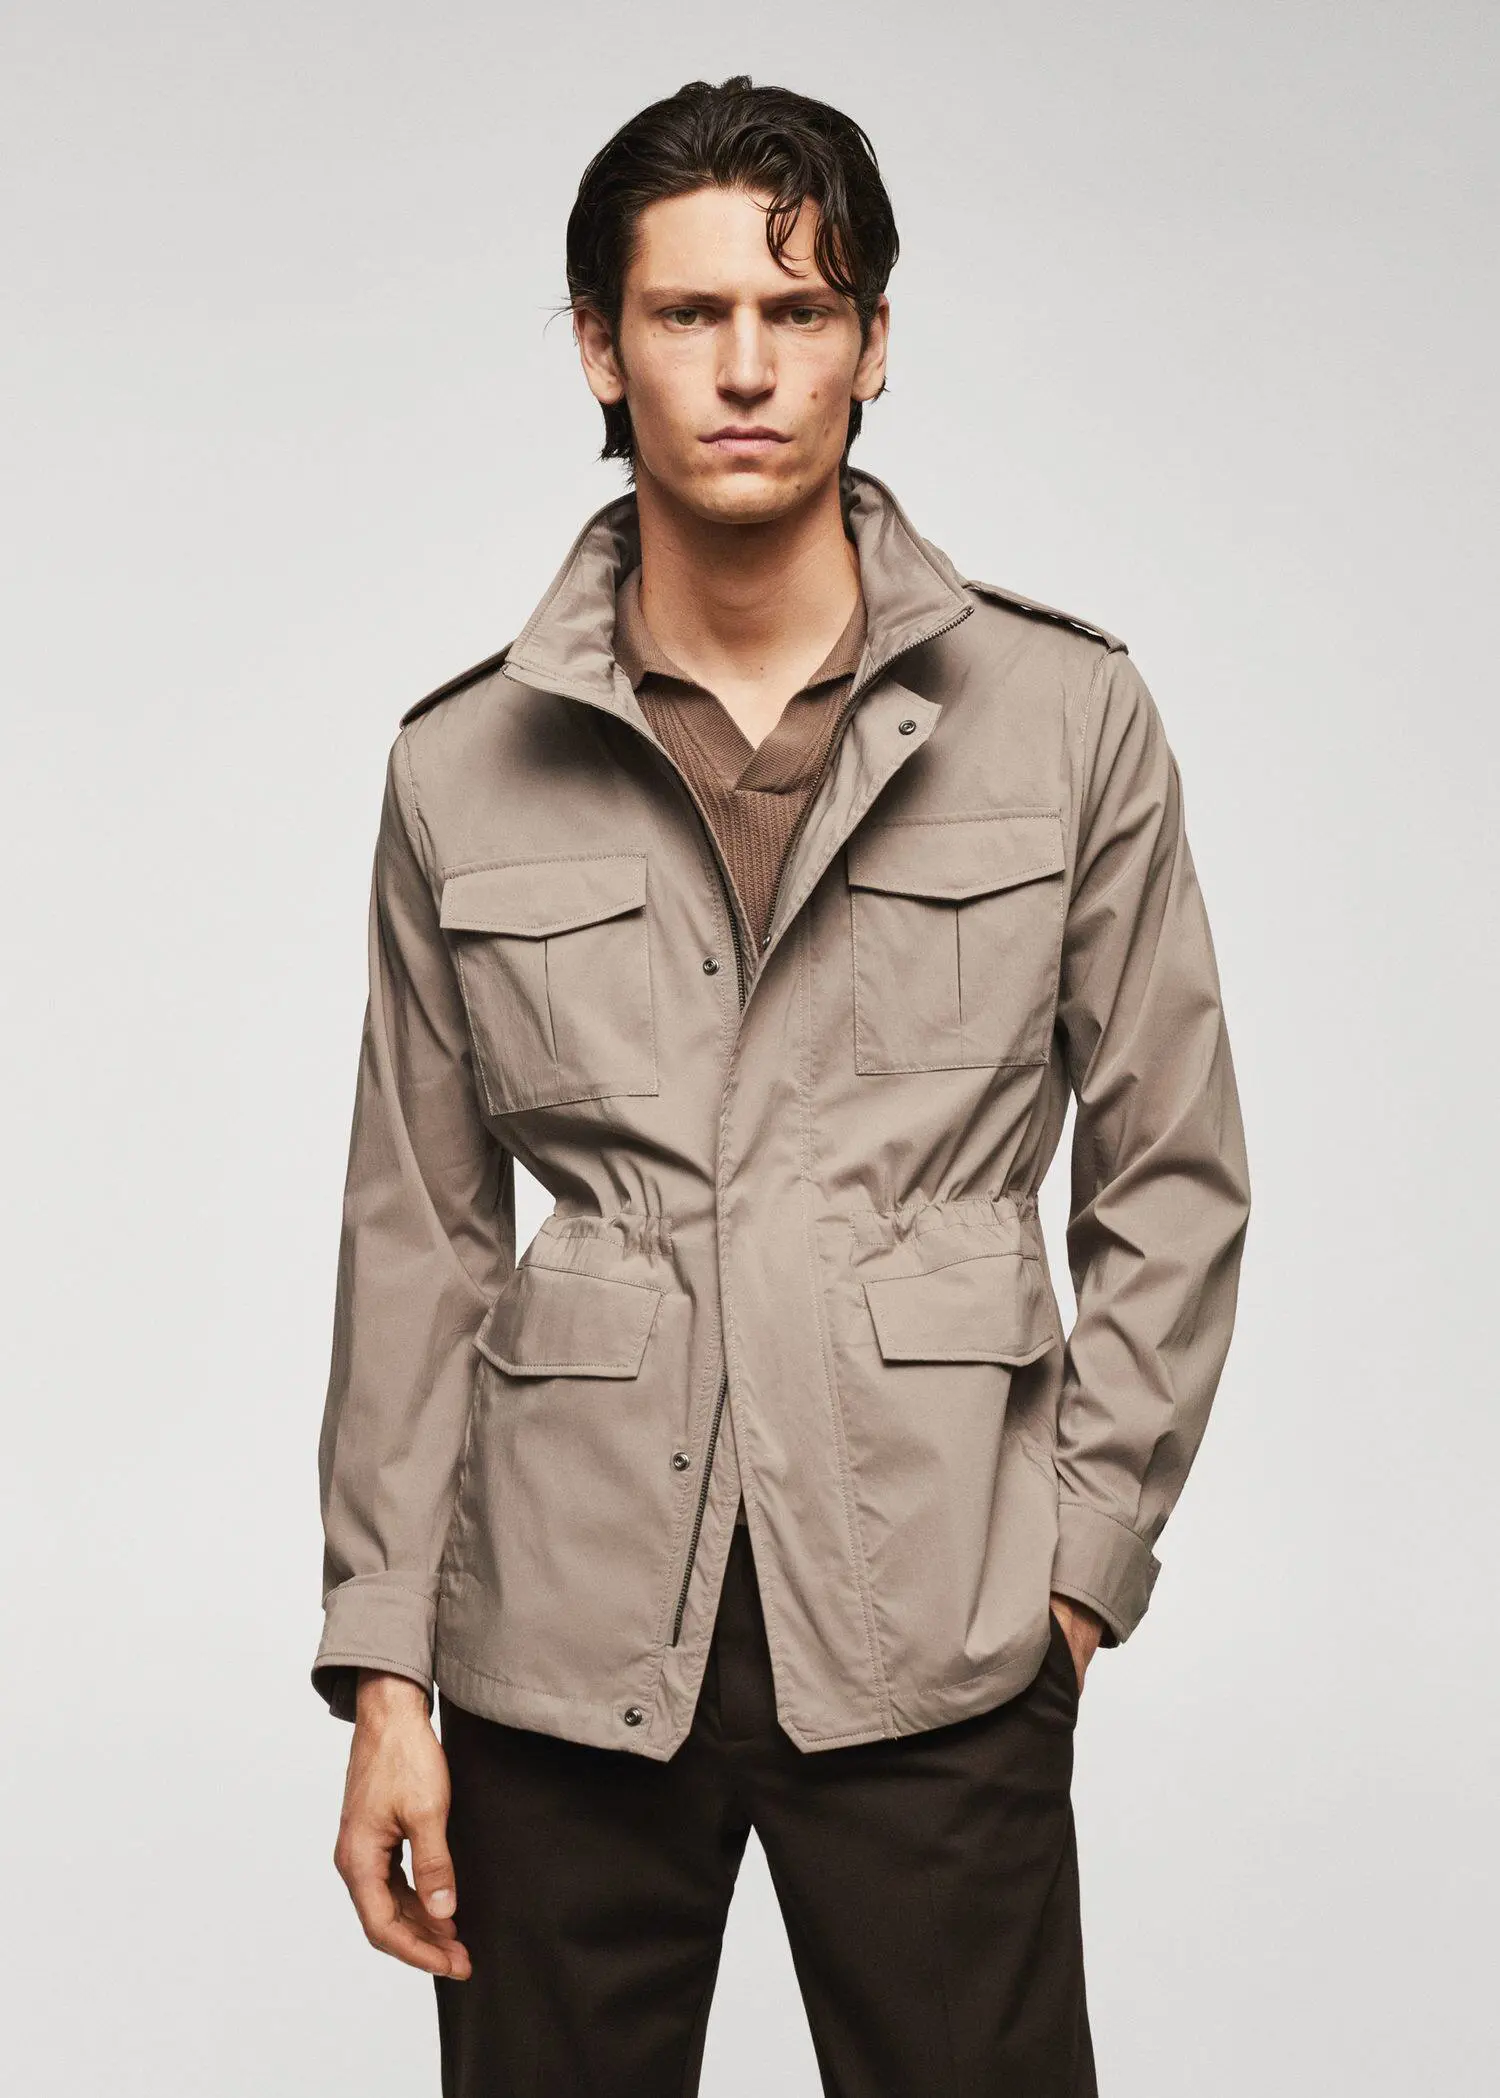 Mango Lightweight saharian jacket with pockets. a man in a tan jacket standing in front of a white wall. 